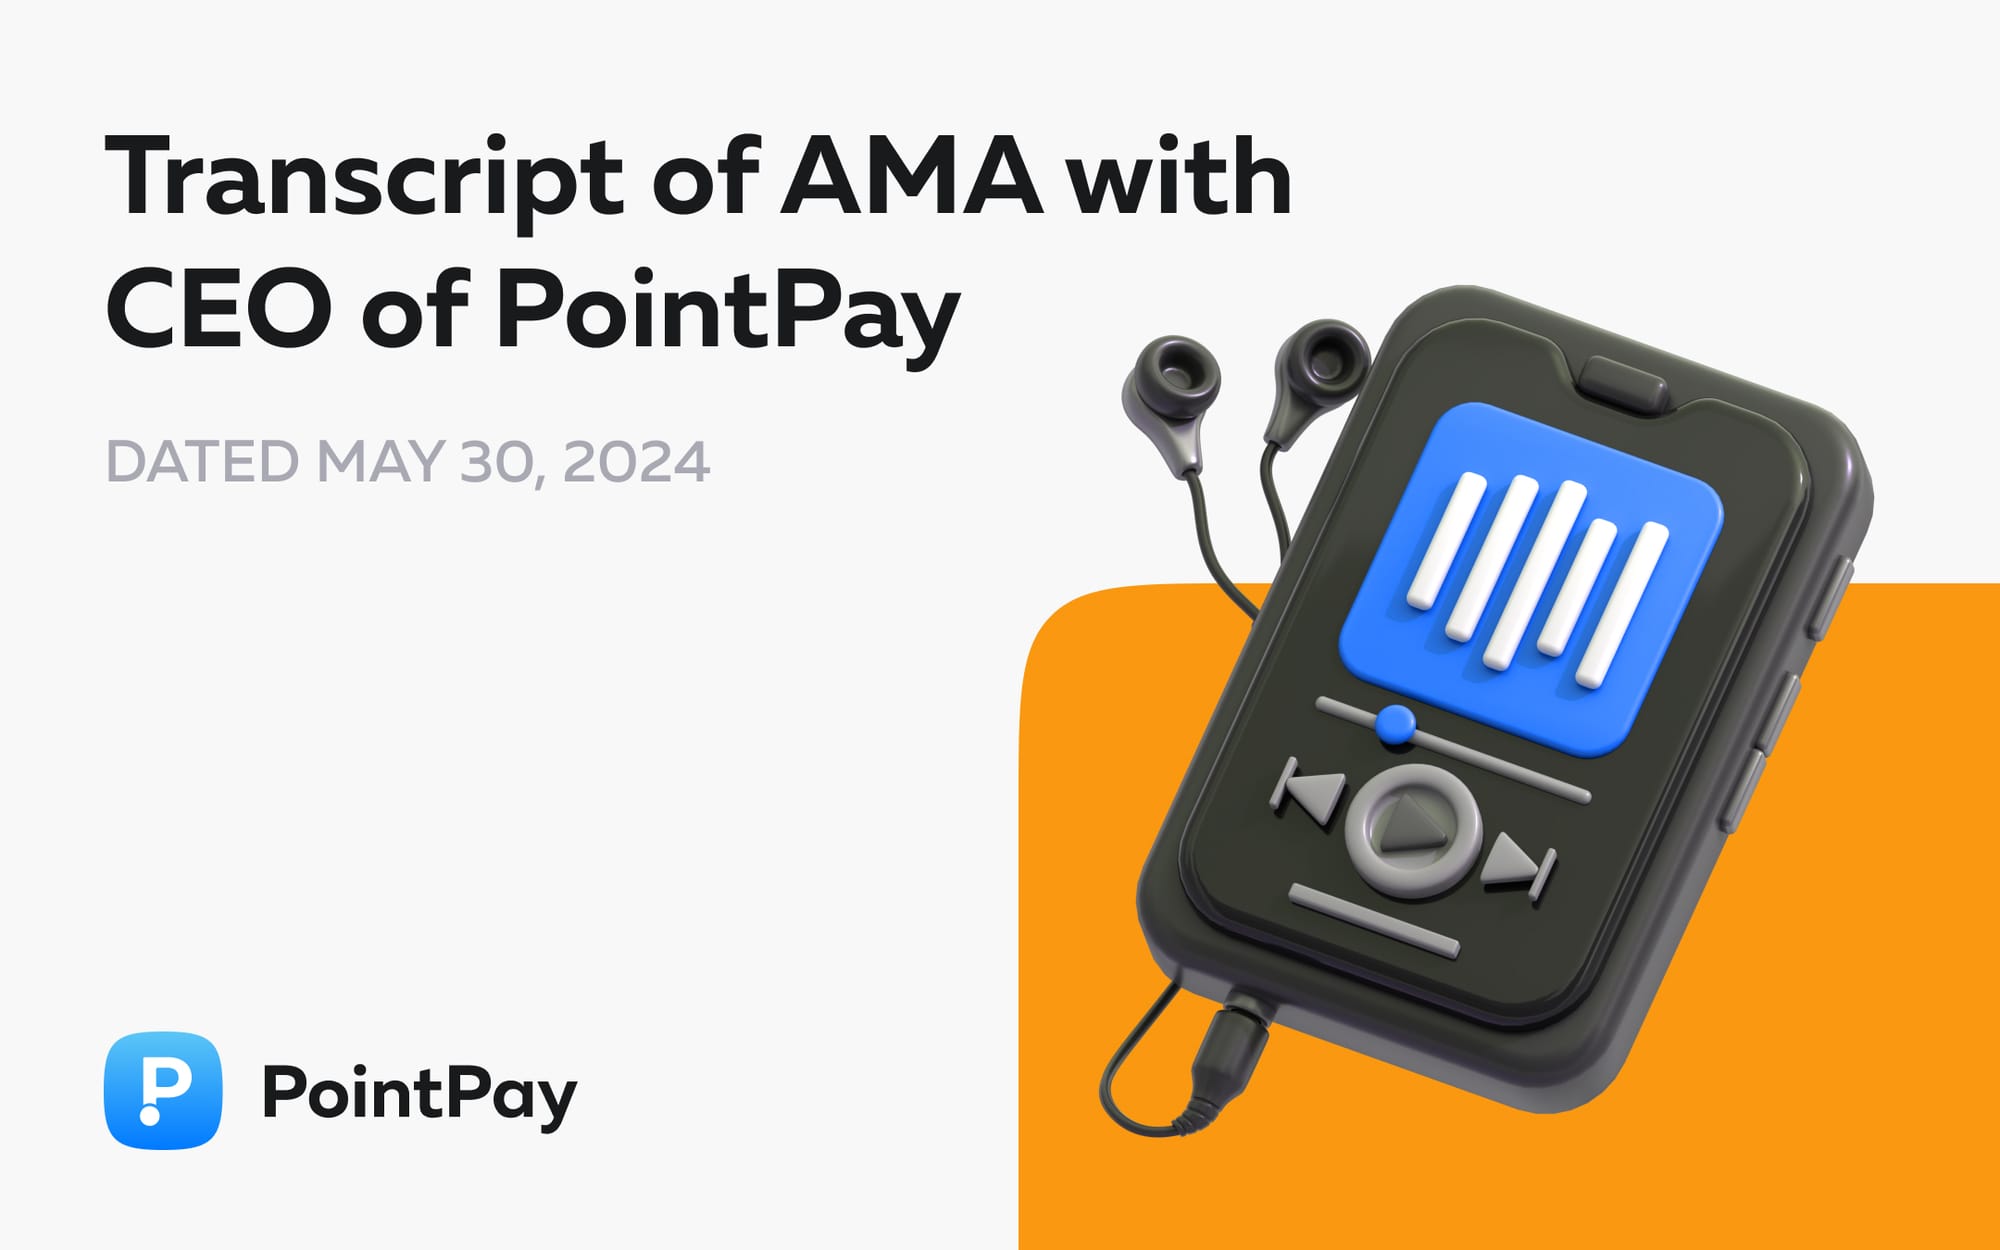 Transcript of AMA with CEO of PointPay – Vladimir Kardapoltsev, May 30th 2024